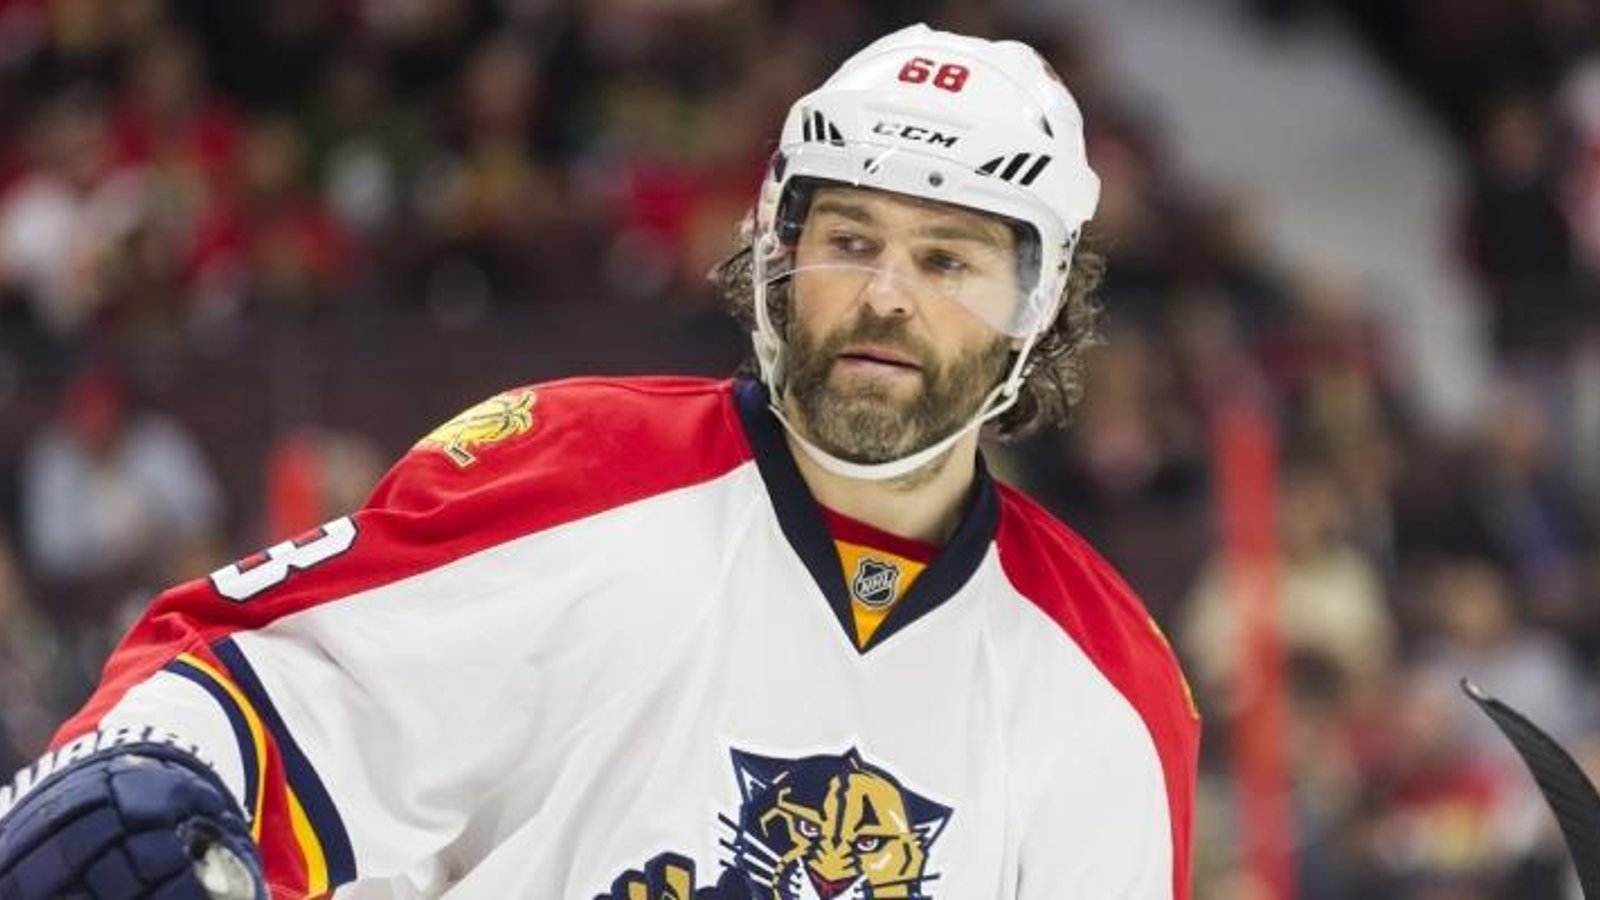 Jaromir Jagr has signed a new NHL contract.